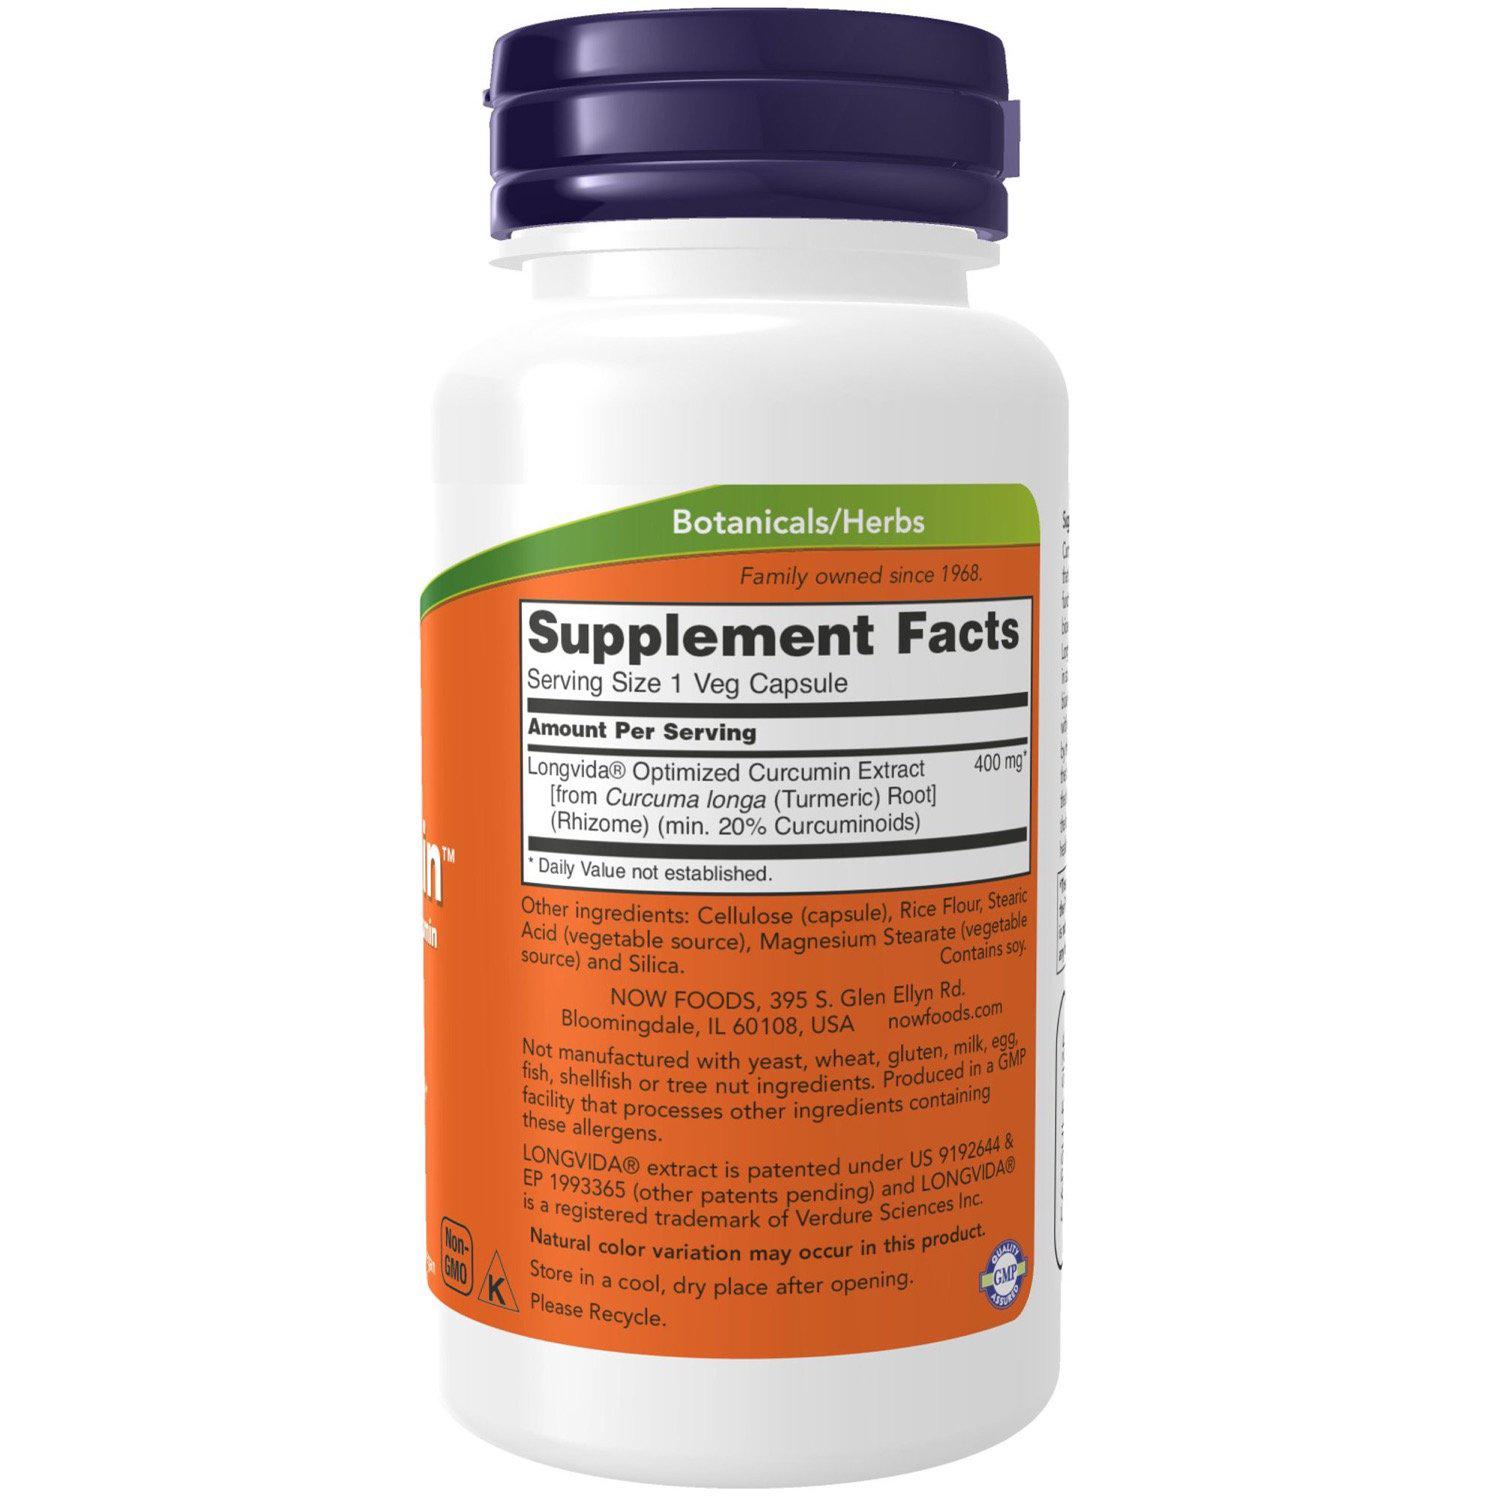 Now Foods, CurcuBrain Cognitive Support 400 mg. - 50 Veg Capsules